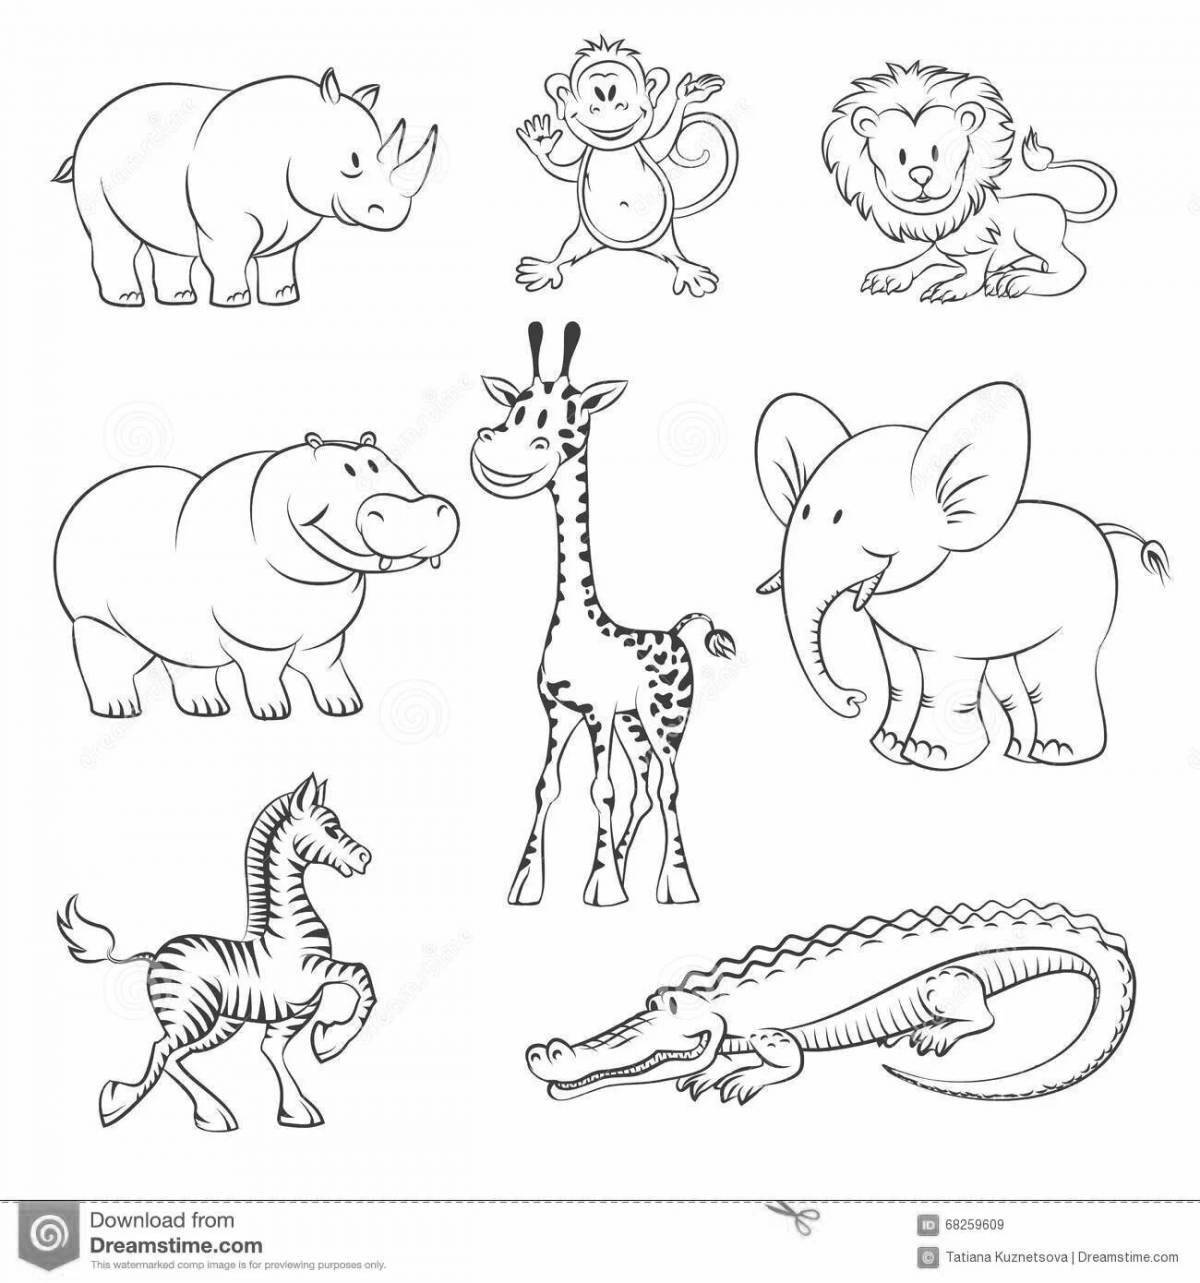 Great coloring book of African animals for 4-5 year olds